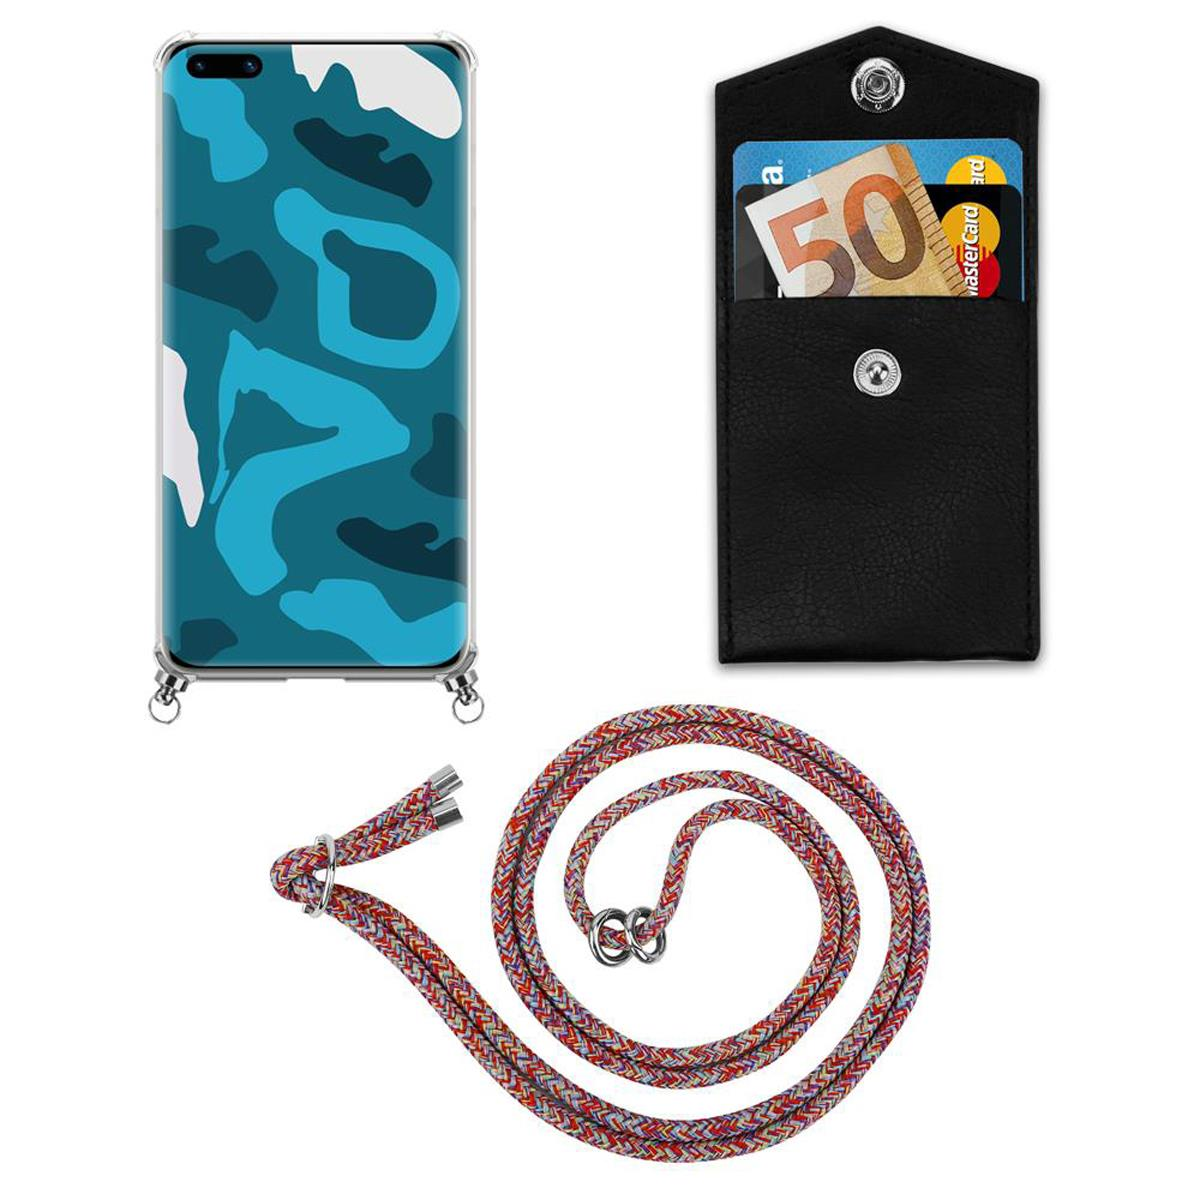 PRO+, abnehmbarer mit Band PARROT Kordel Silber PRO / P40 Huawei, CADORABO und P40 Ringen, Handy COLORFUL Kette Backcover, Hülle,